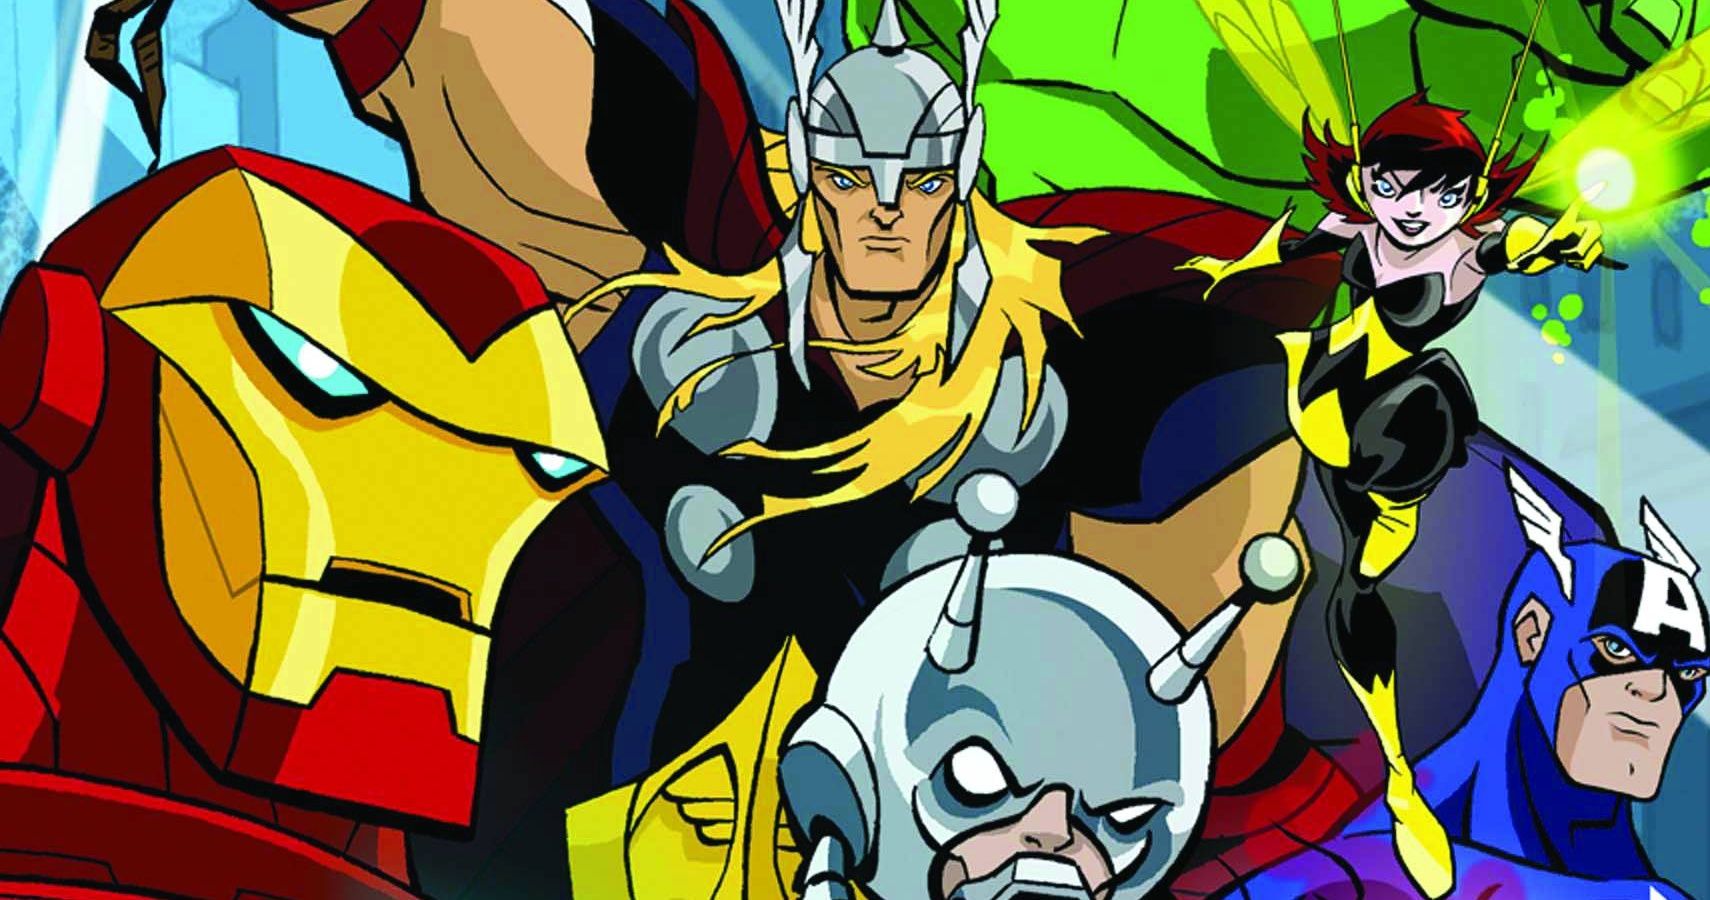 The 10 Best Episodes Of Avengers: Earth's Mightiest Heroes (According To IMDb)